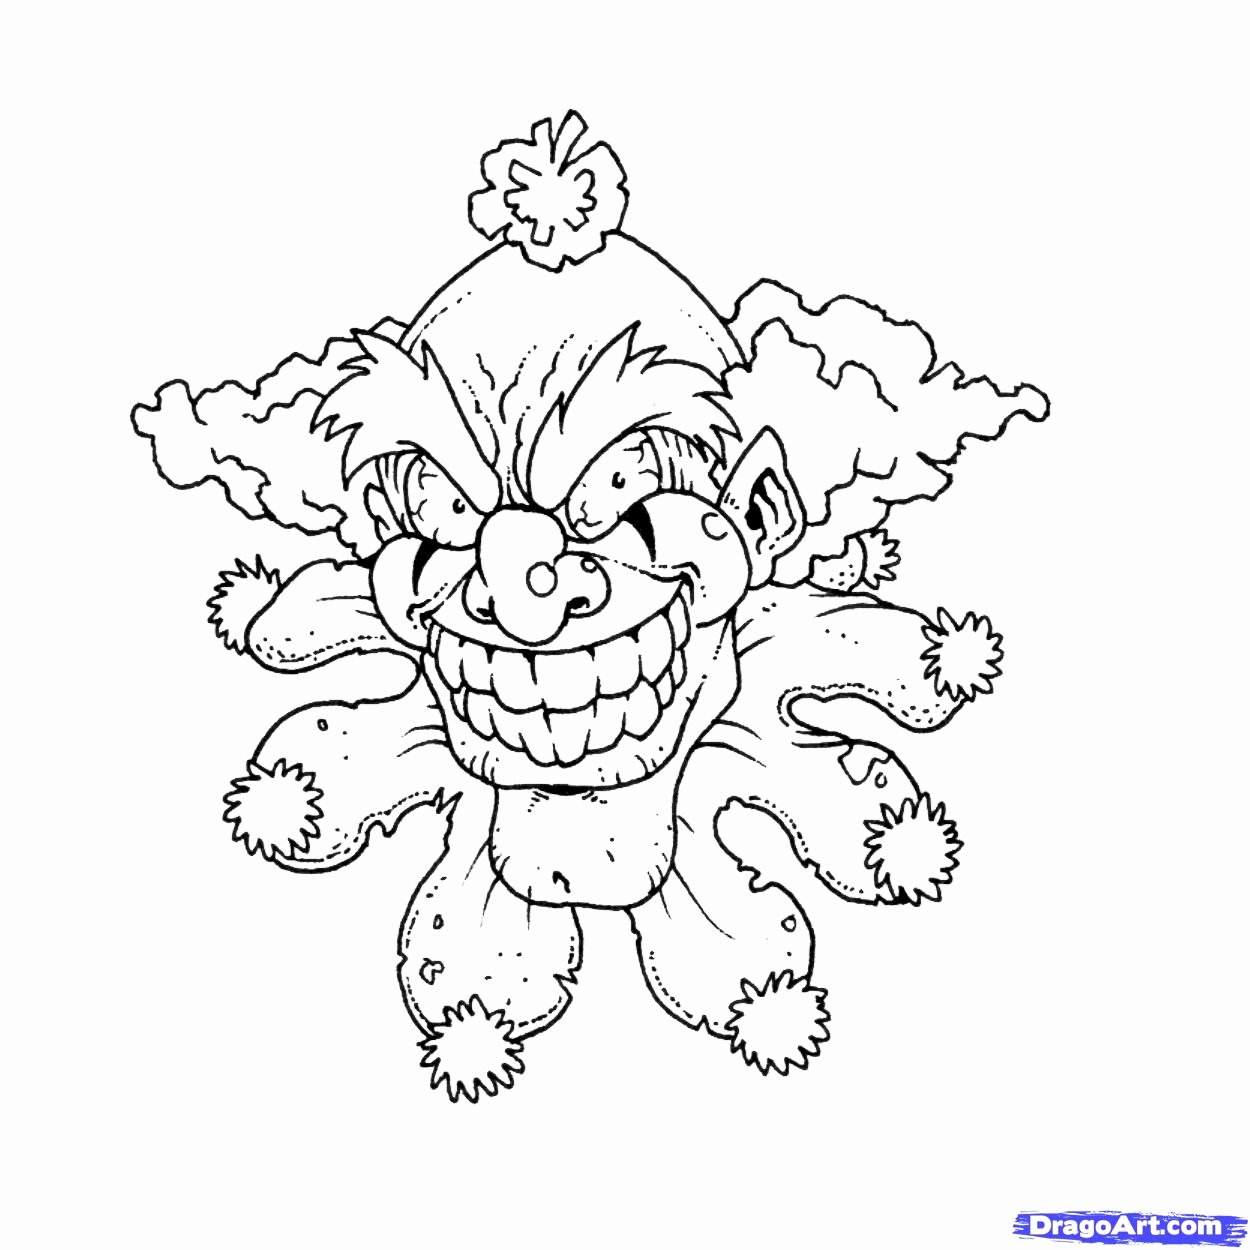 evil clown coloring pages pennywise coloring pages 2017 at getcoloringscom free evil coloring clown pages 